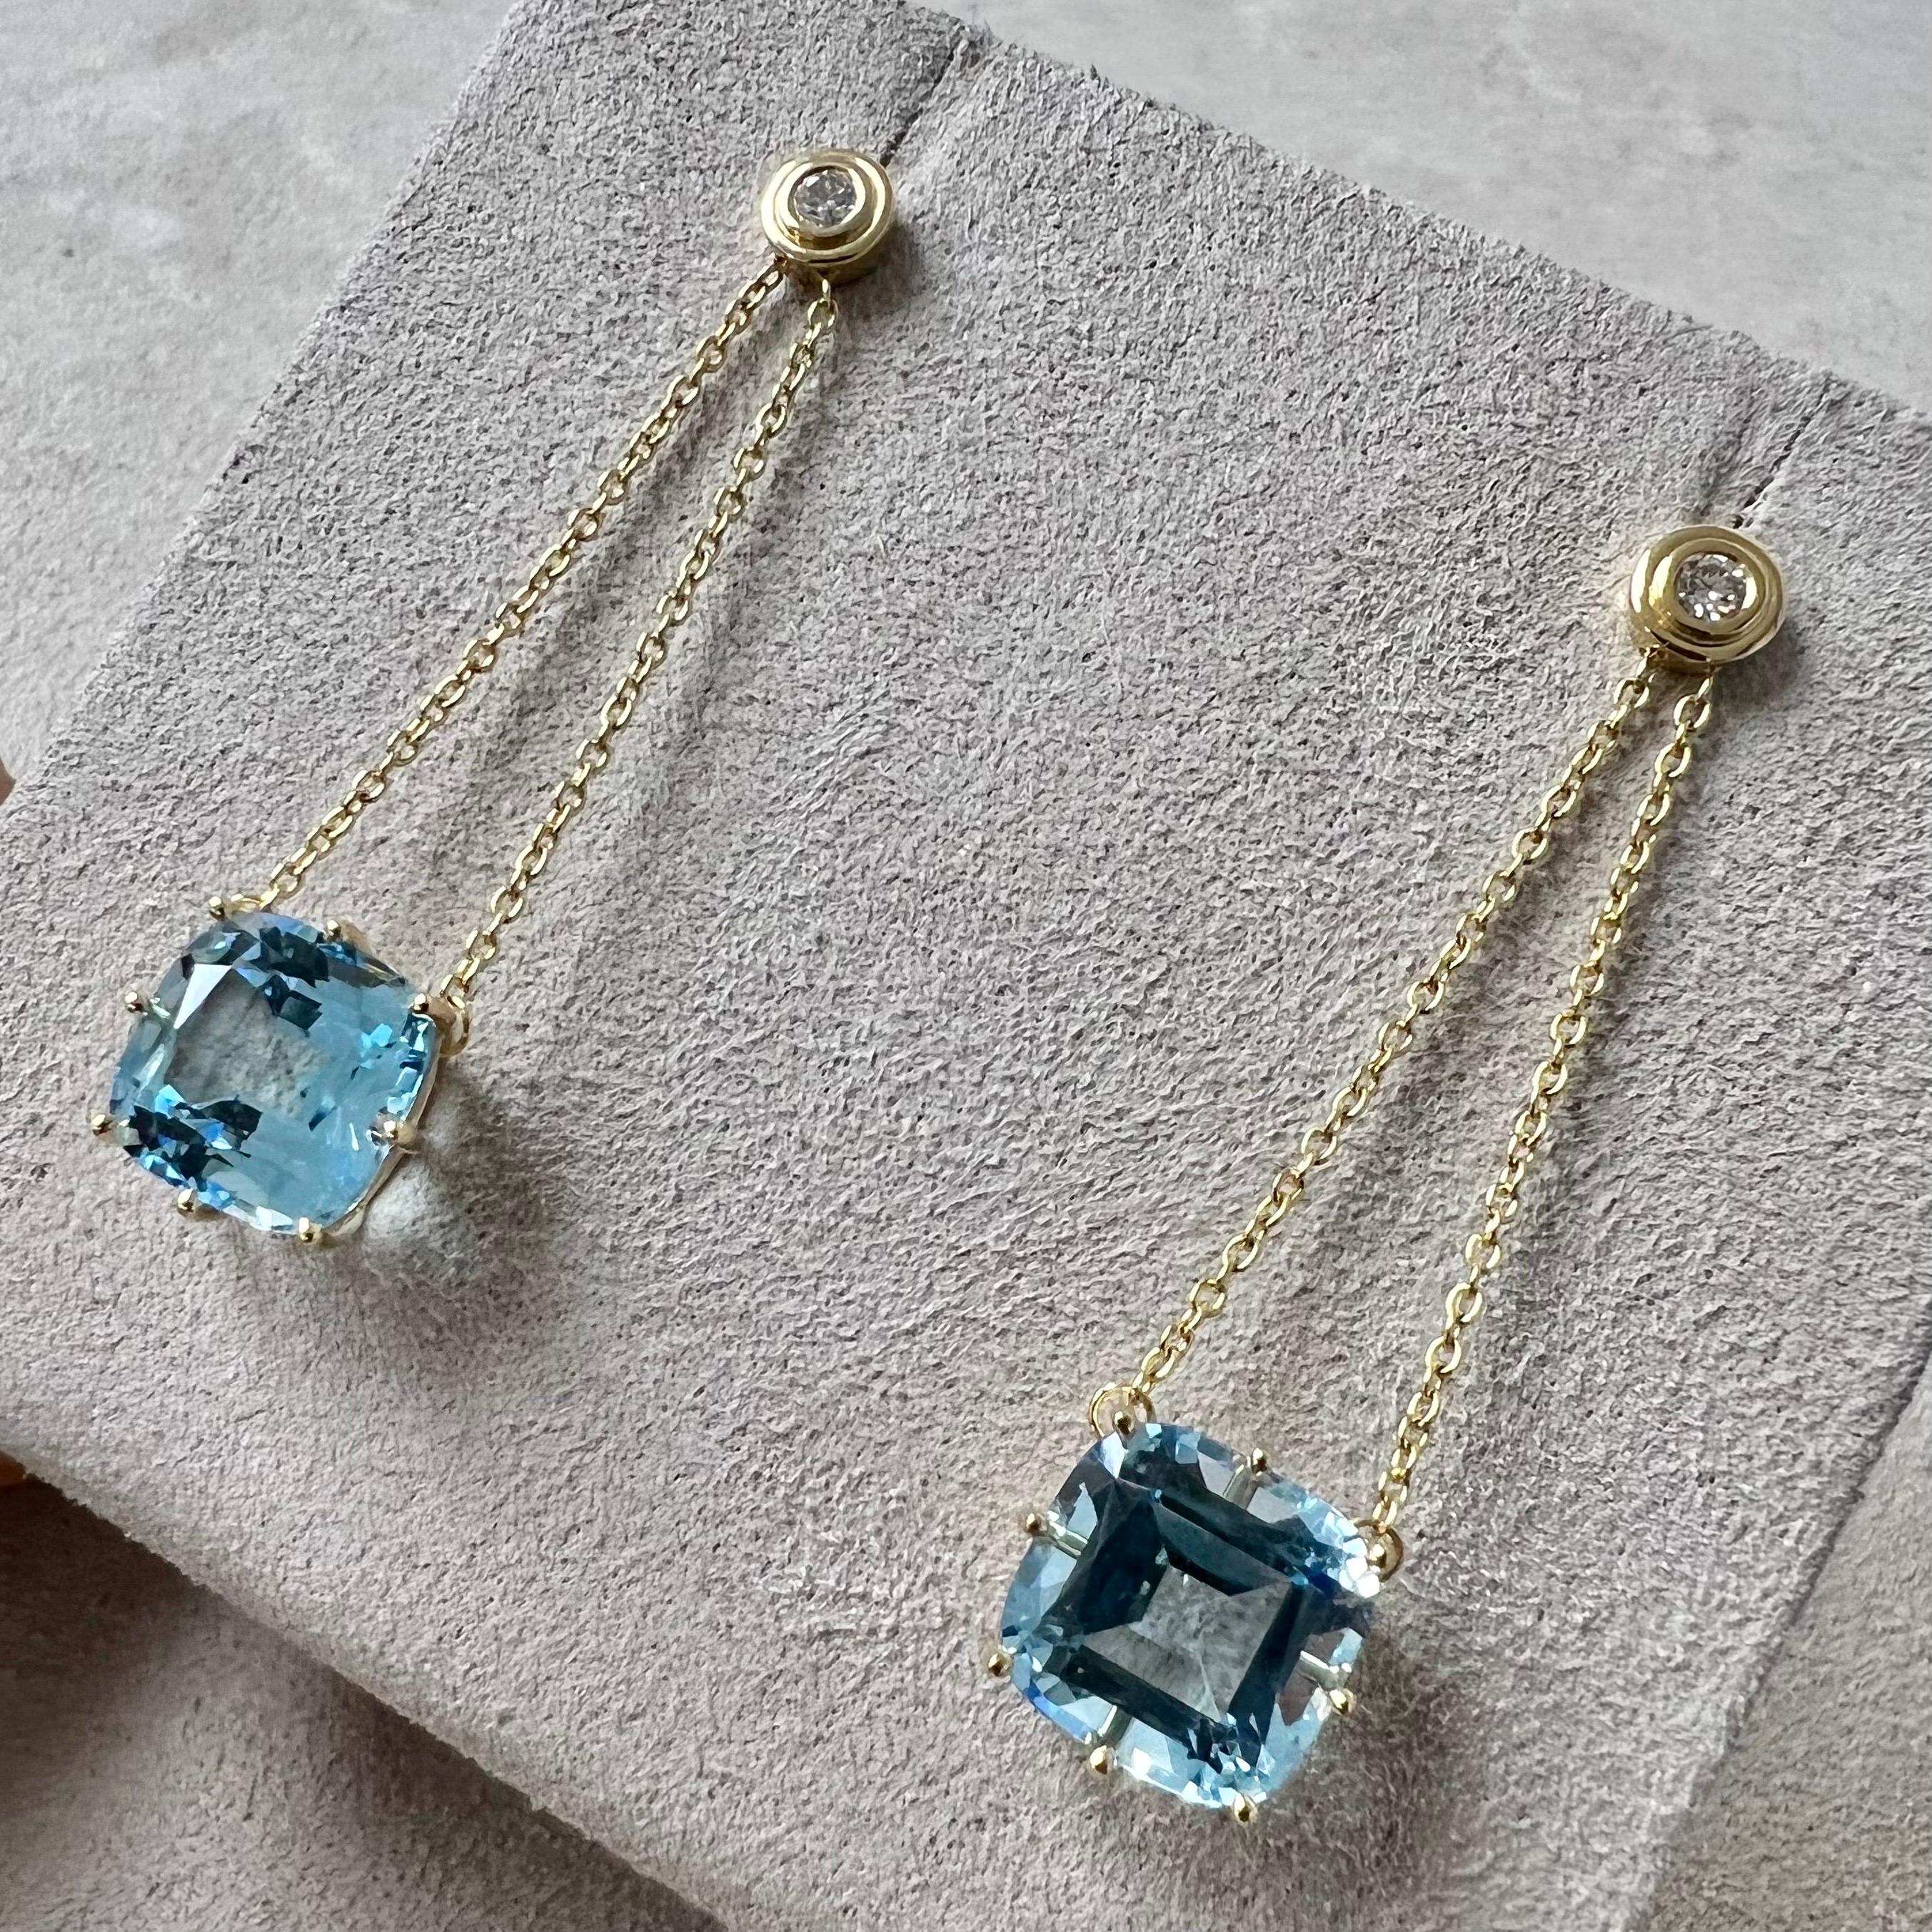 Created in 18 karat yellow gold
Blue topaz 8 carats approx.
Champagne diamonds 0.10 carat approx.
Post backs for pierced ears


About the Designers

Drawing inspiration from little things, Dharmesh & Namrata Kothari have created an extraordinary and